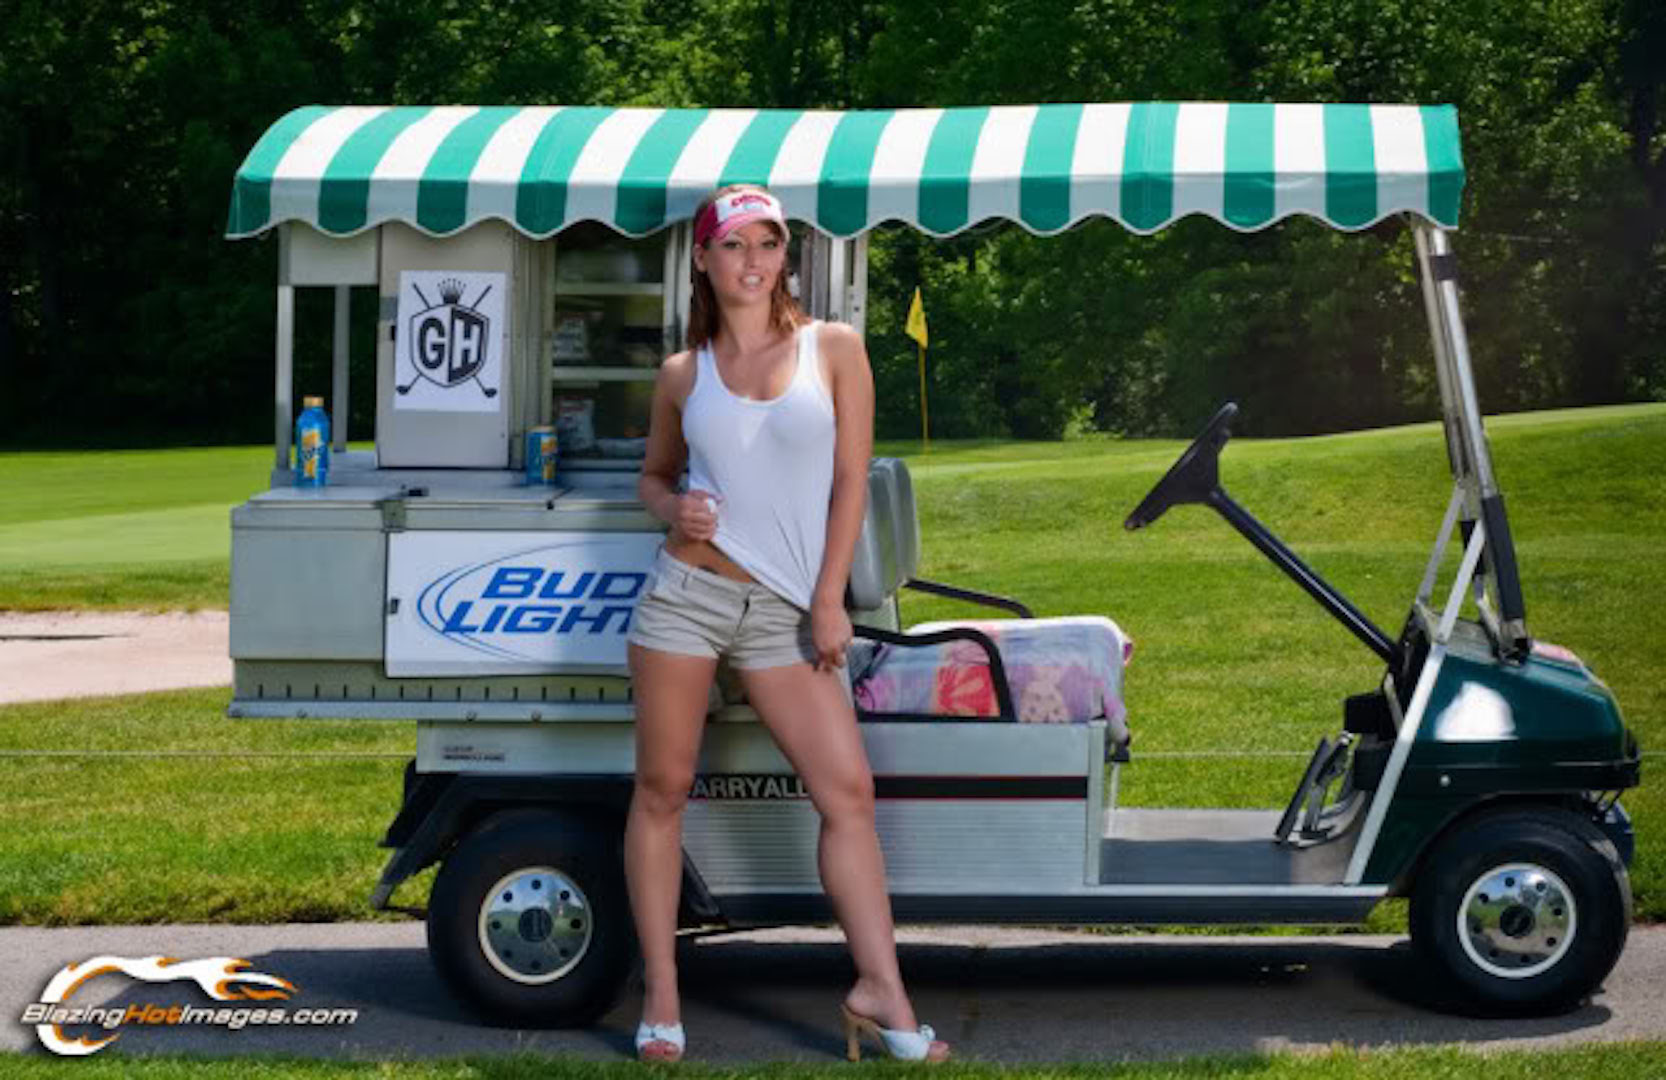 The only thing missing in sporting clays versus golf is the beer cart. 